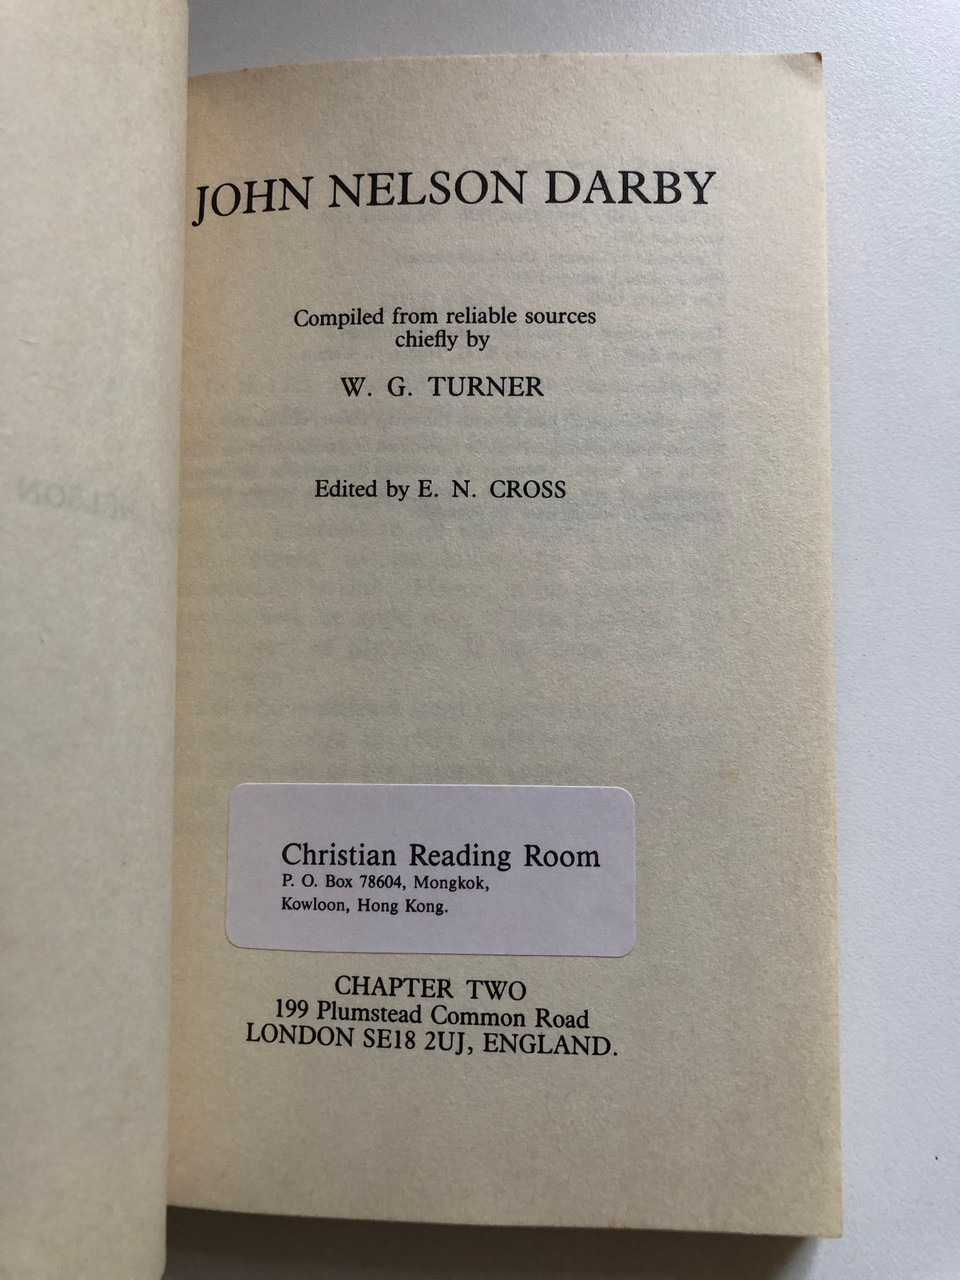 John_Nelson_Darby_A_Biography_by_W.G._Turner_Brief_account_of_Darbys_life_Compiled_from_reliable_sources_chiefly_by_W._G._TURNER_Publisher_Chapter_Two_5__69956.1691296492.1280.1280.JPG (960×1280)